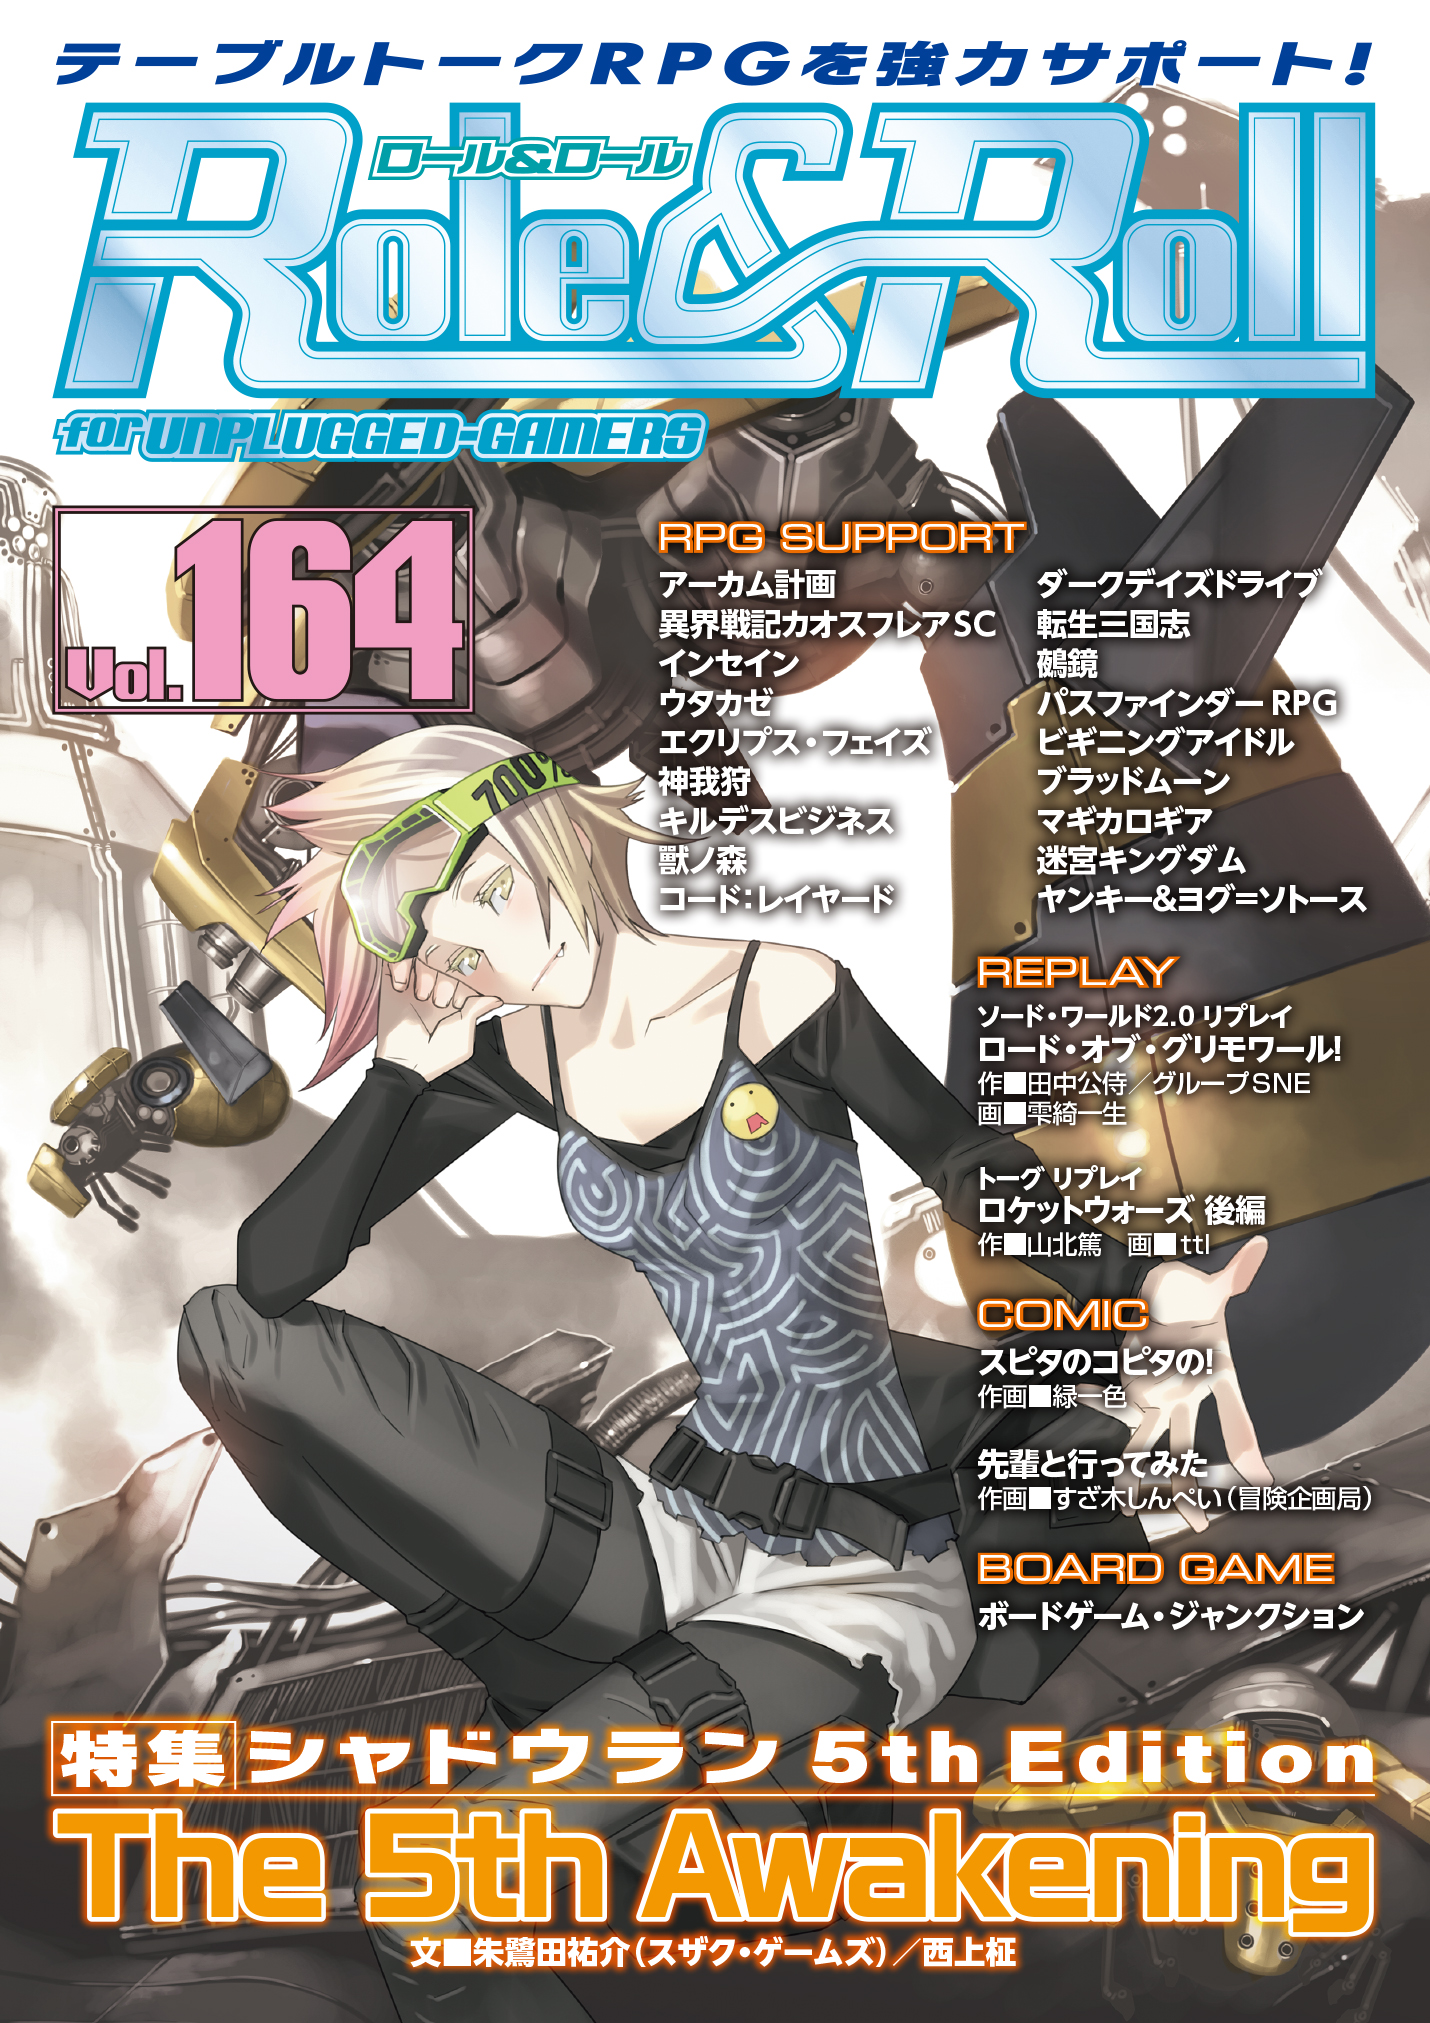 Role&Roll Vol.164